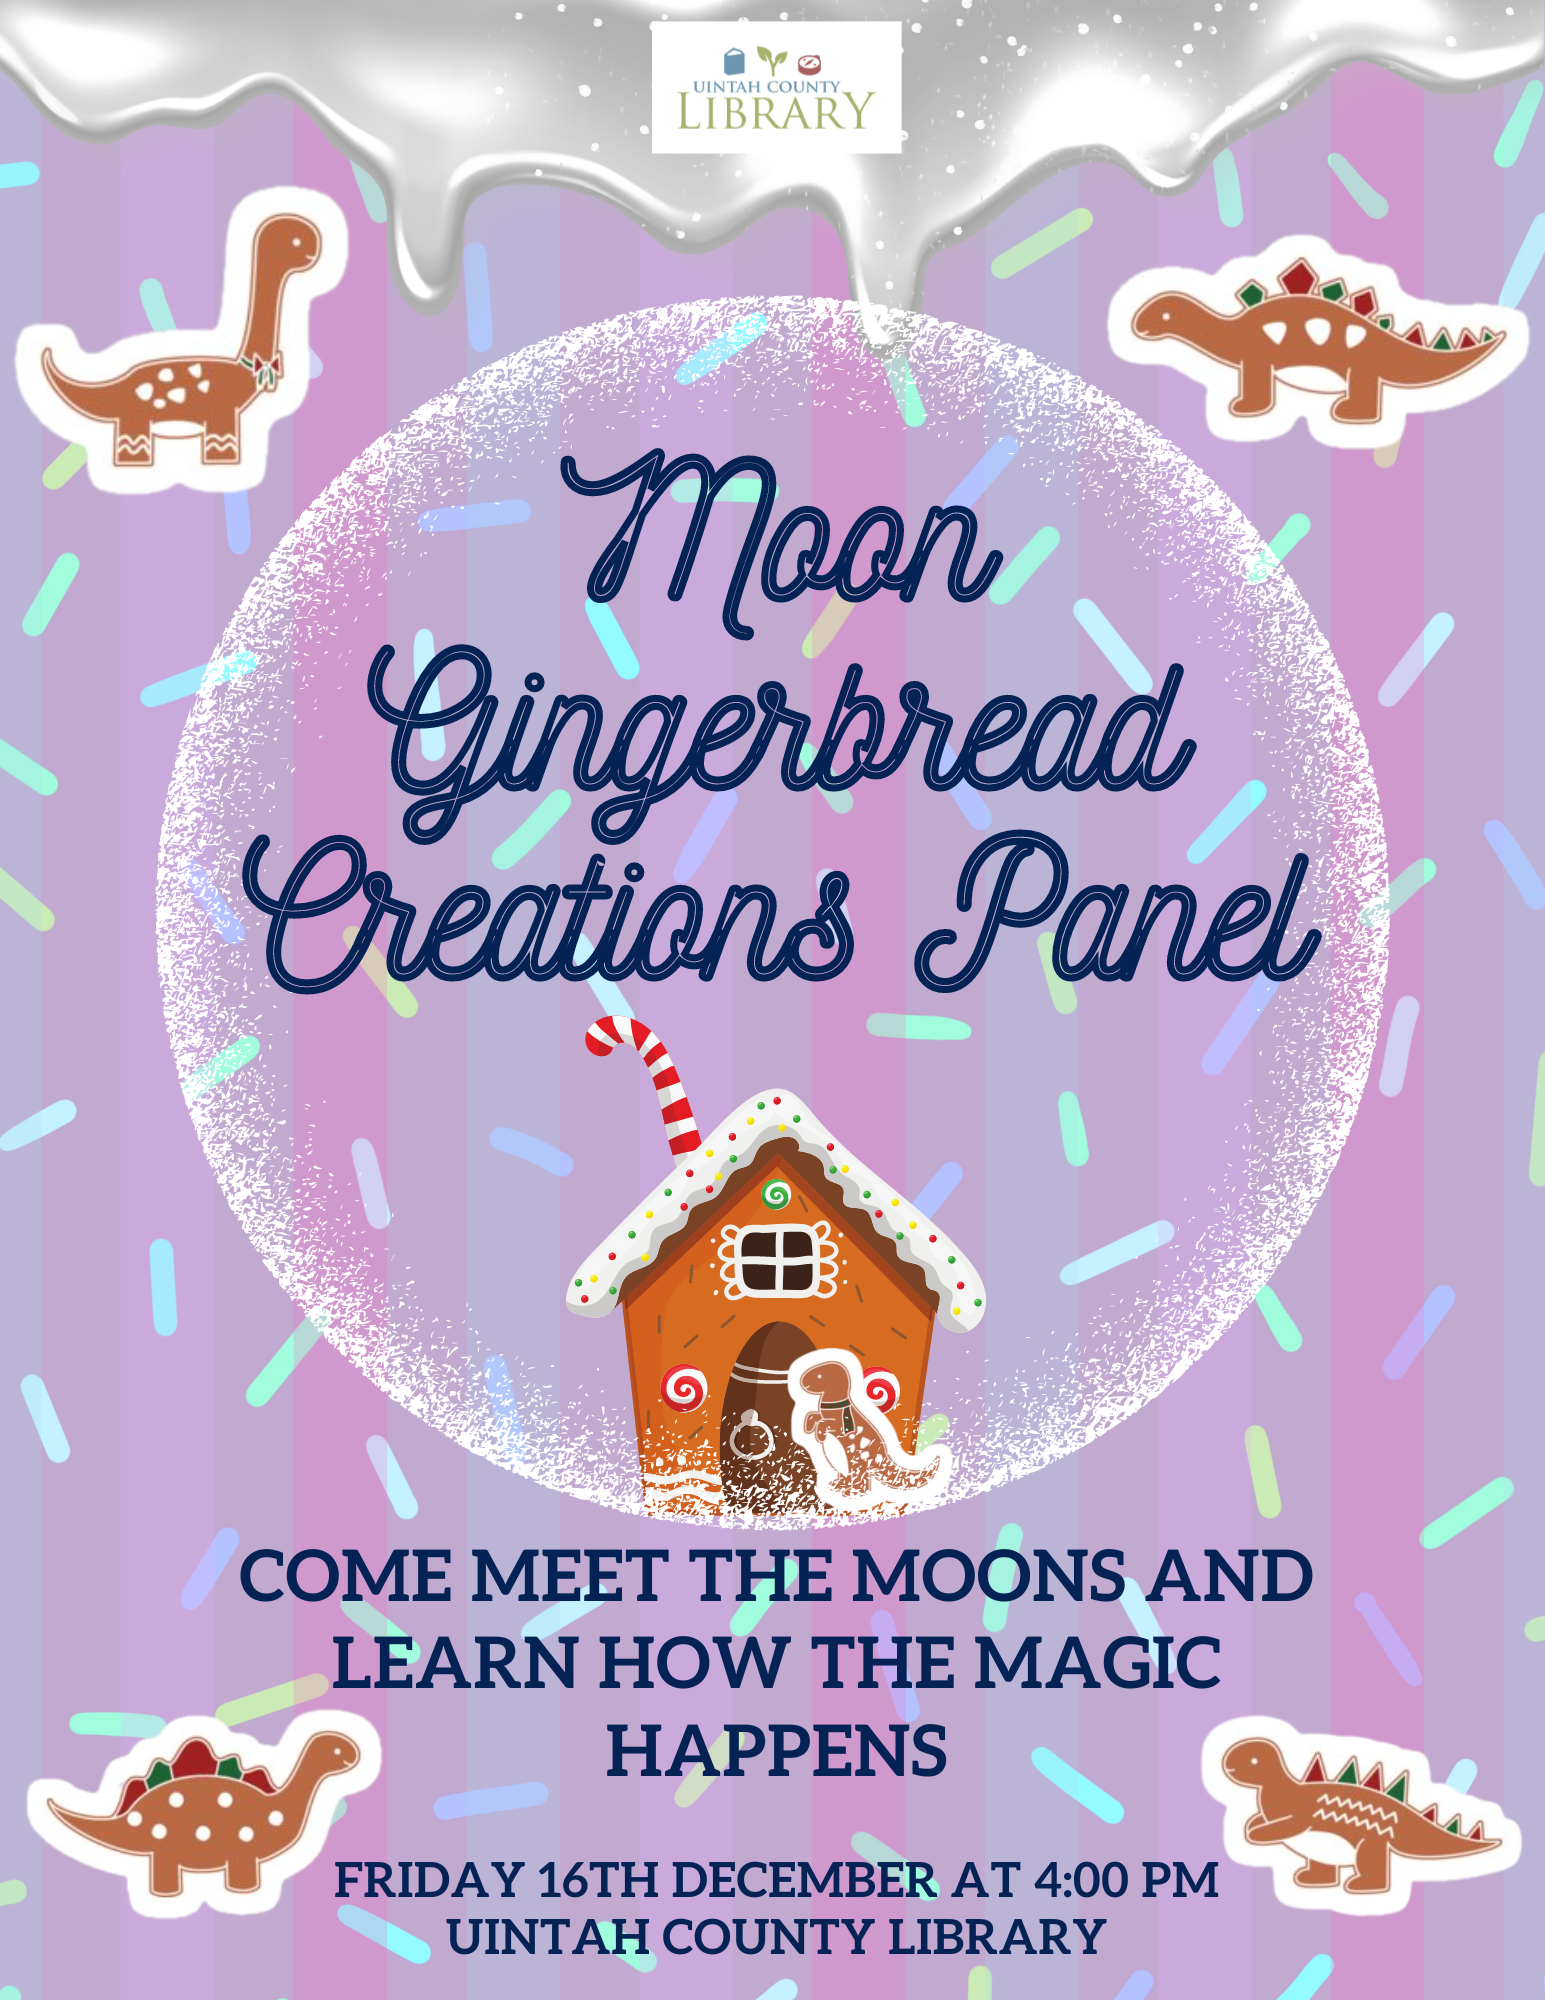 "Moon Gingerbread Creations Panel | Come meet the moons and learn how the magic happens | Friday 16th December AT 4:00 PM UINTAH COUNTY LIBRARY"